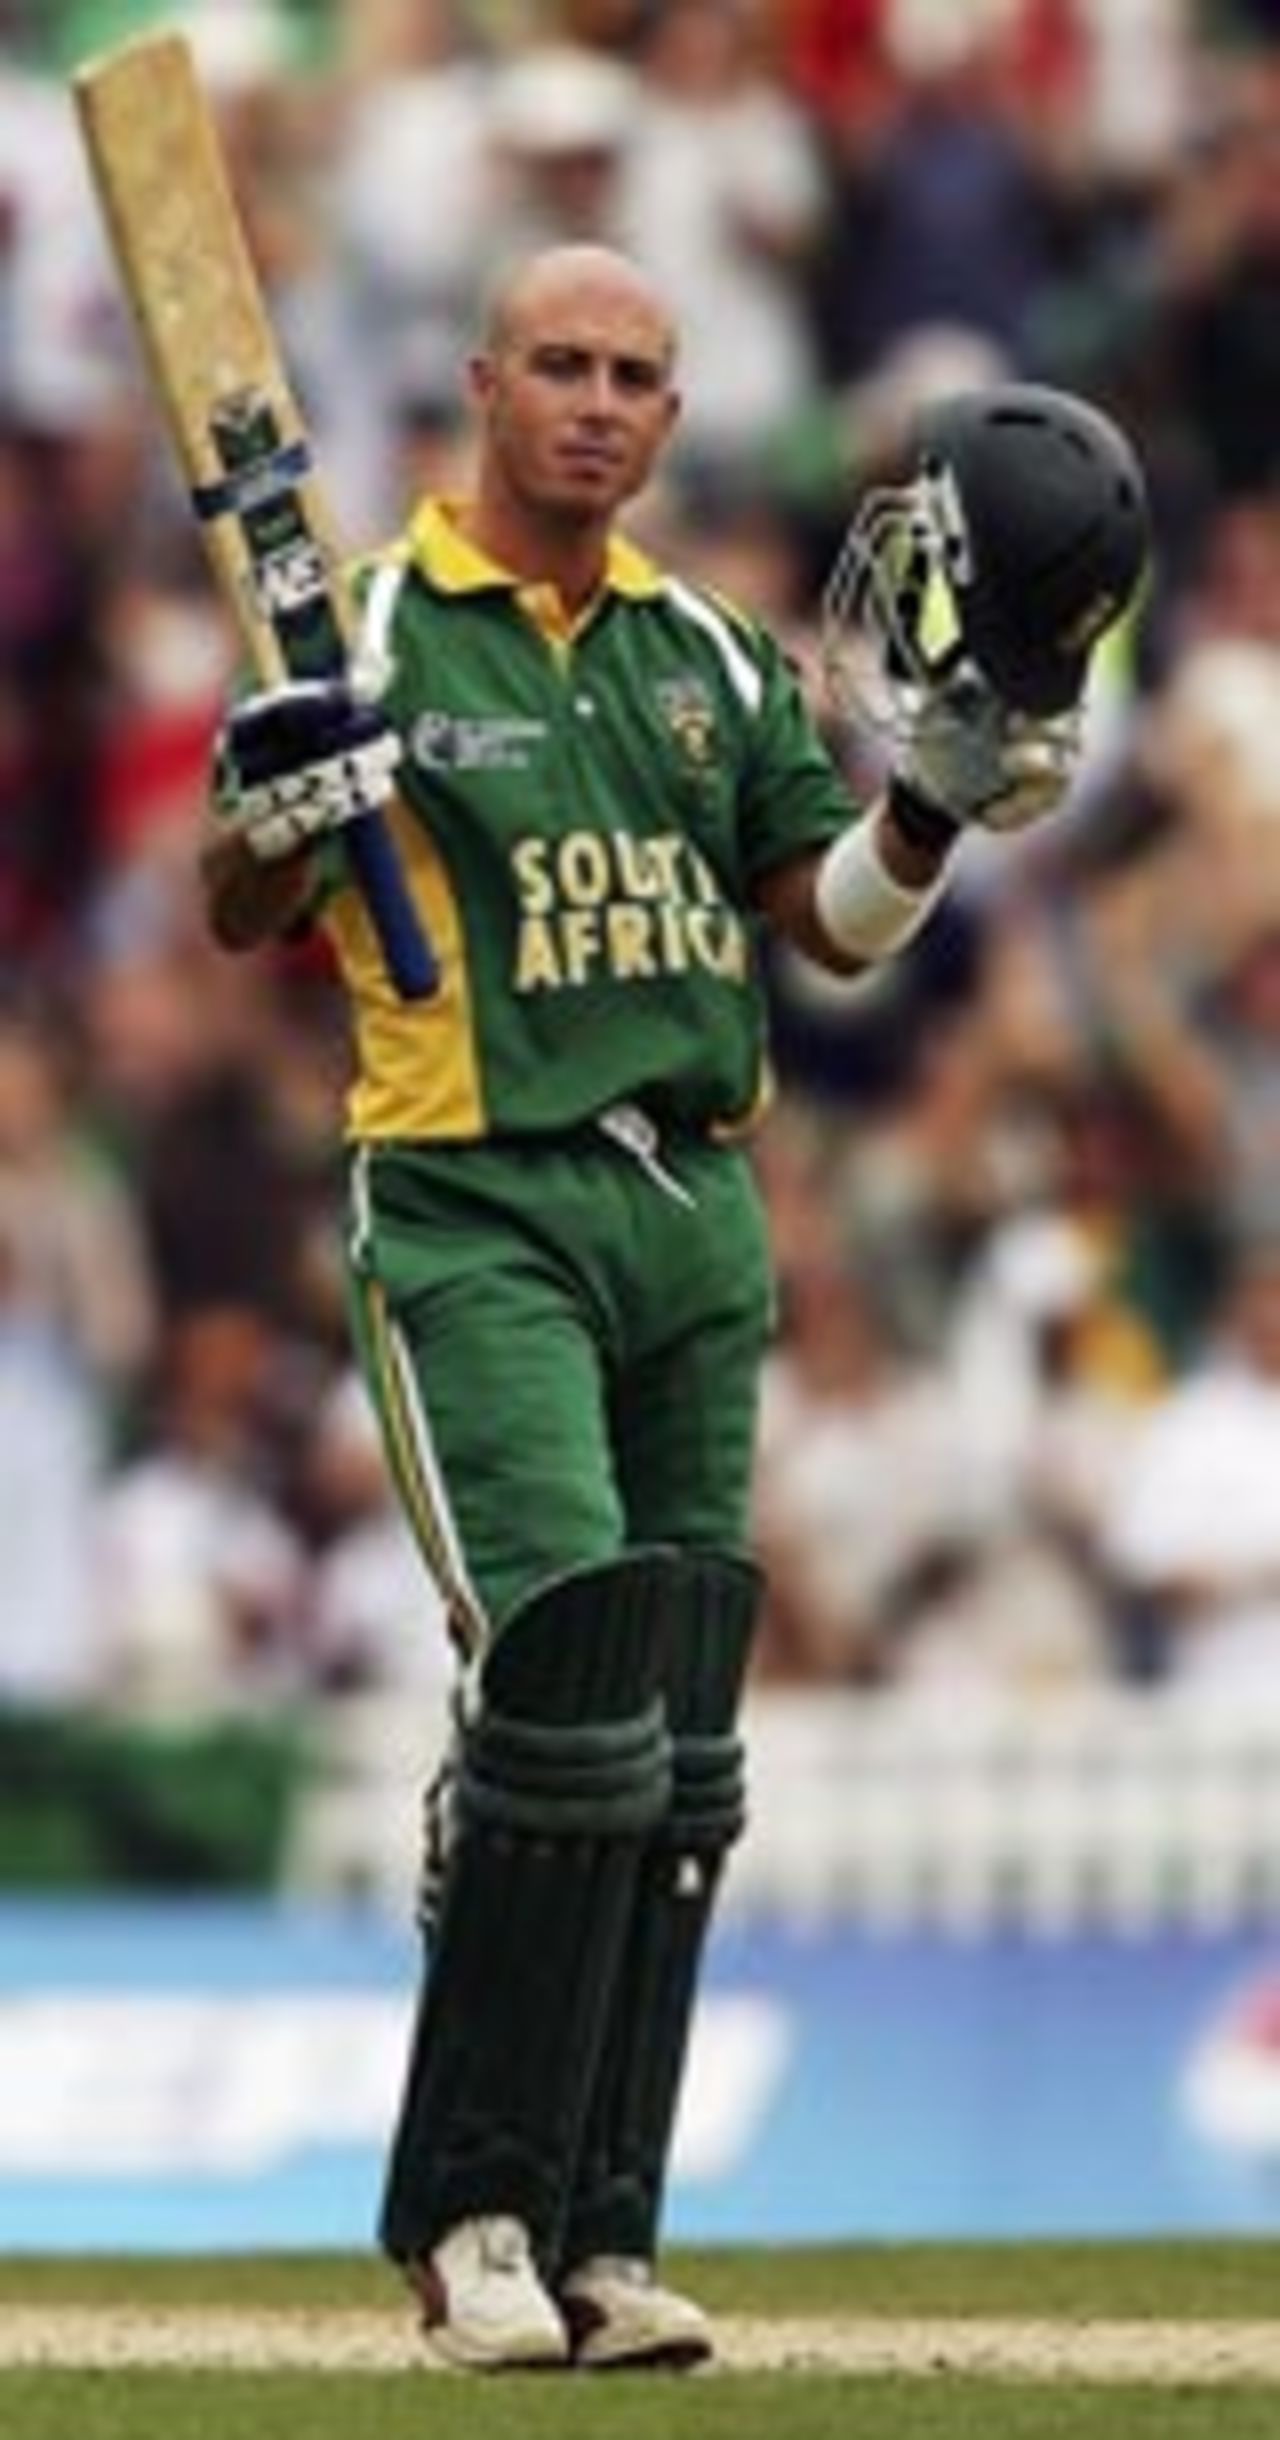 Herschelle Gibbs celebrates his hundred against West Indies, South Africa v West Indies, ICC Champions Trophy, September 18 2004